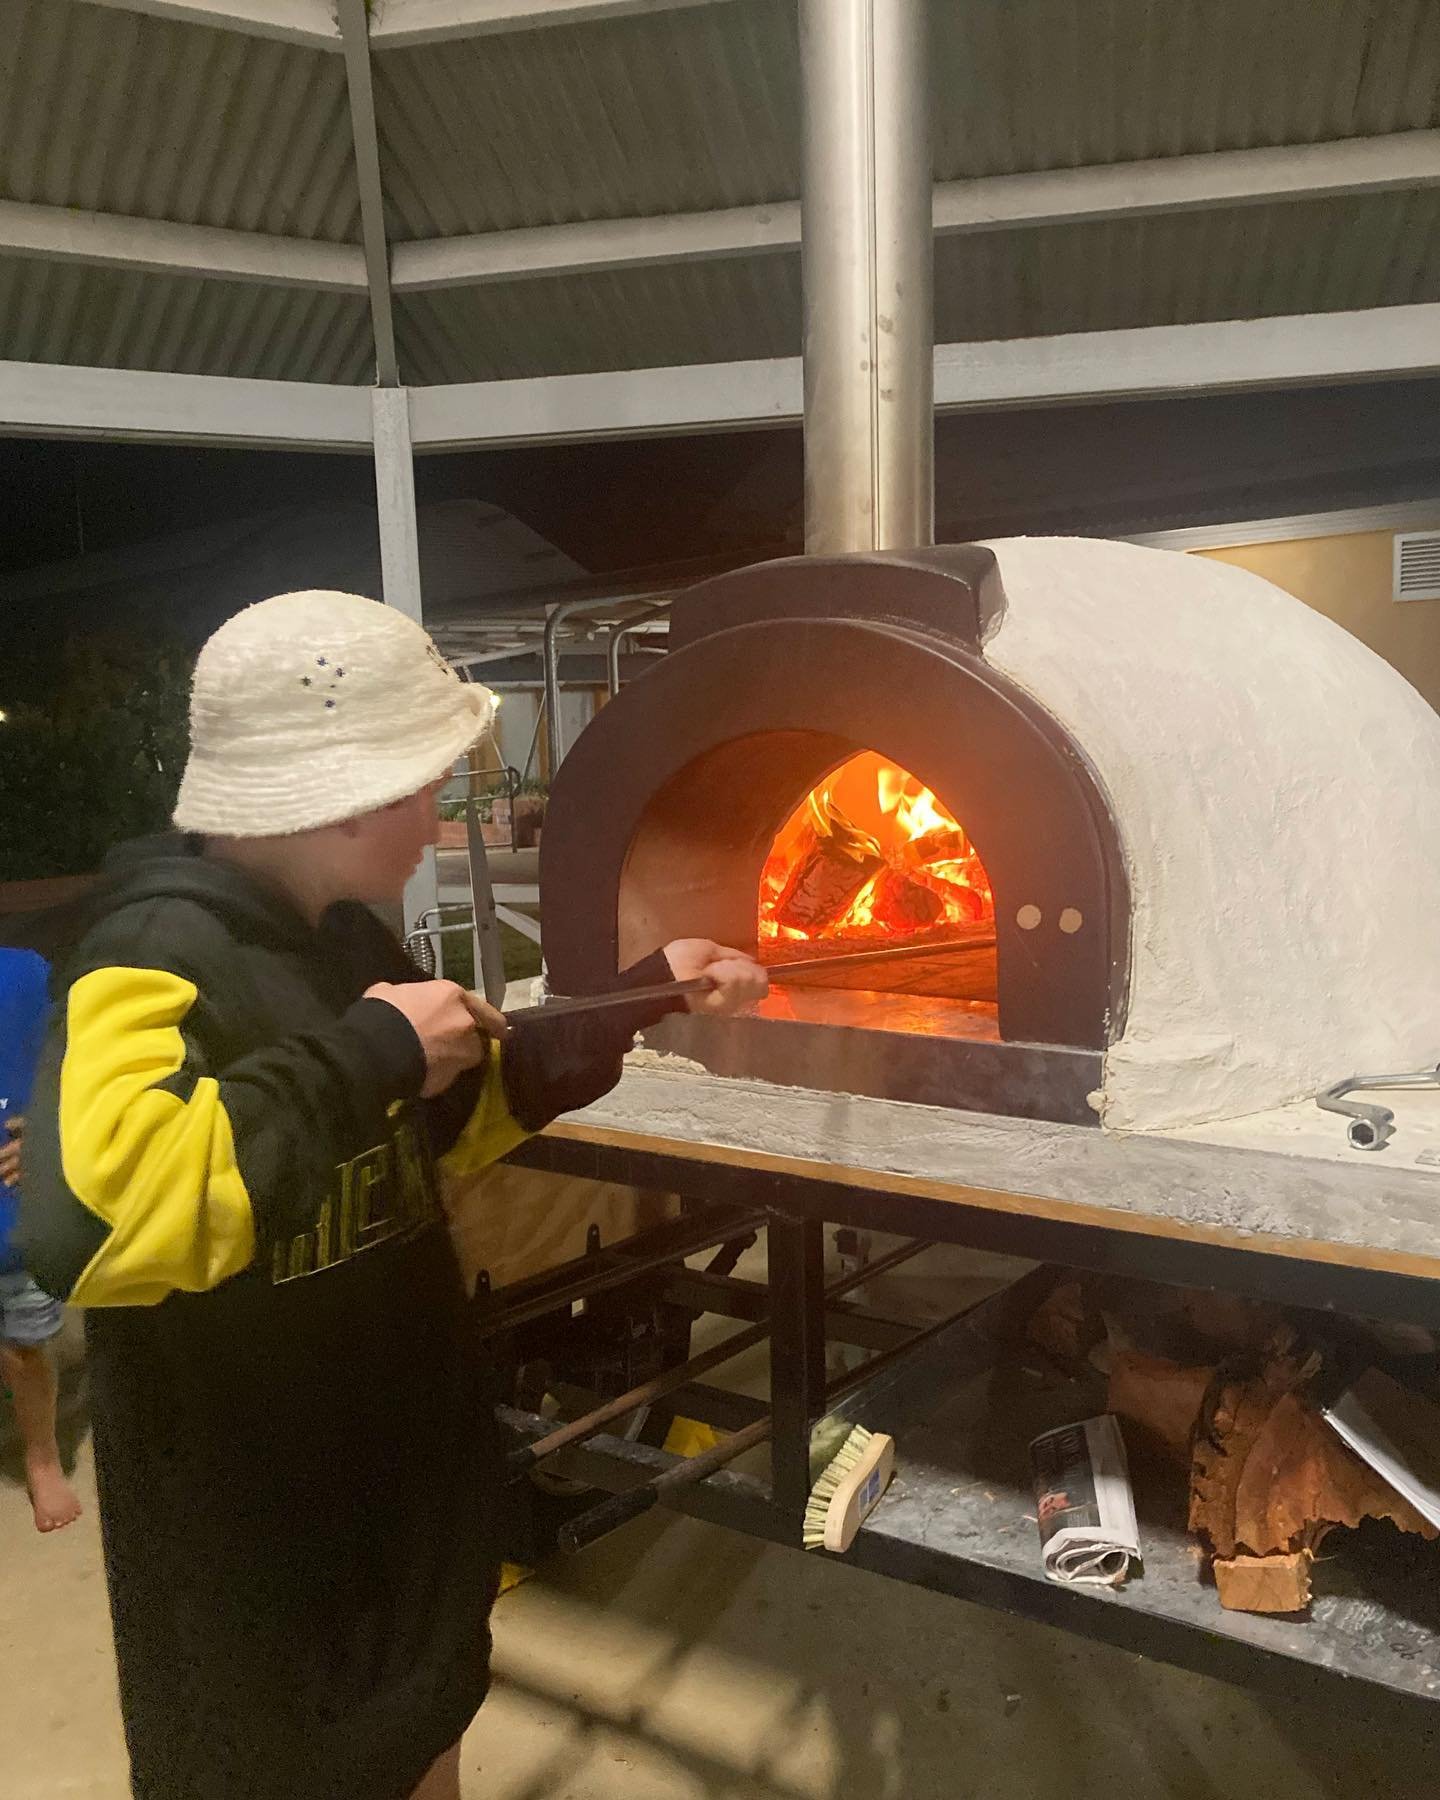 The student leadership team were treated last night to some home made pizzas in our new pizza oven. Their efforts over the past few months have not gone without notice so thank you to the team for your continued dedication and hard work. Over the com